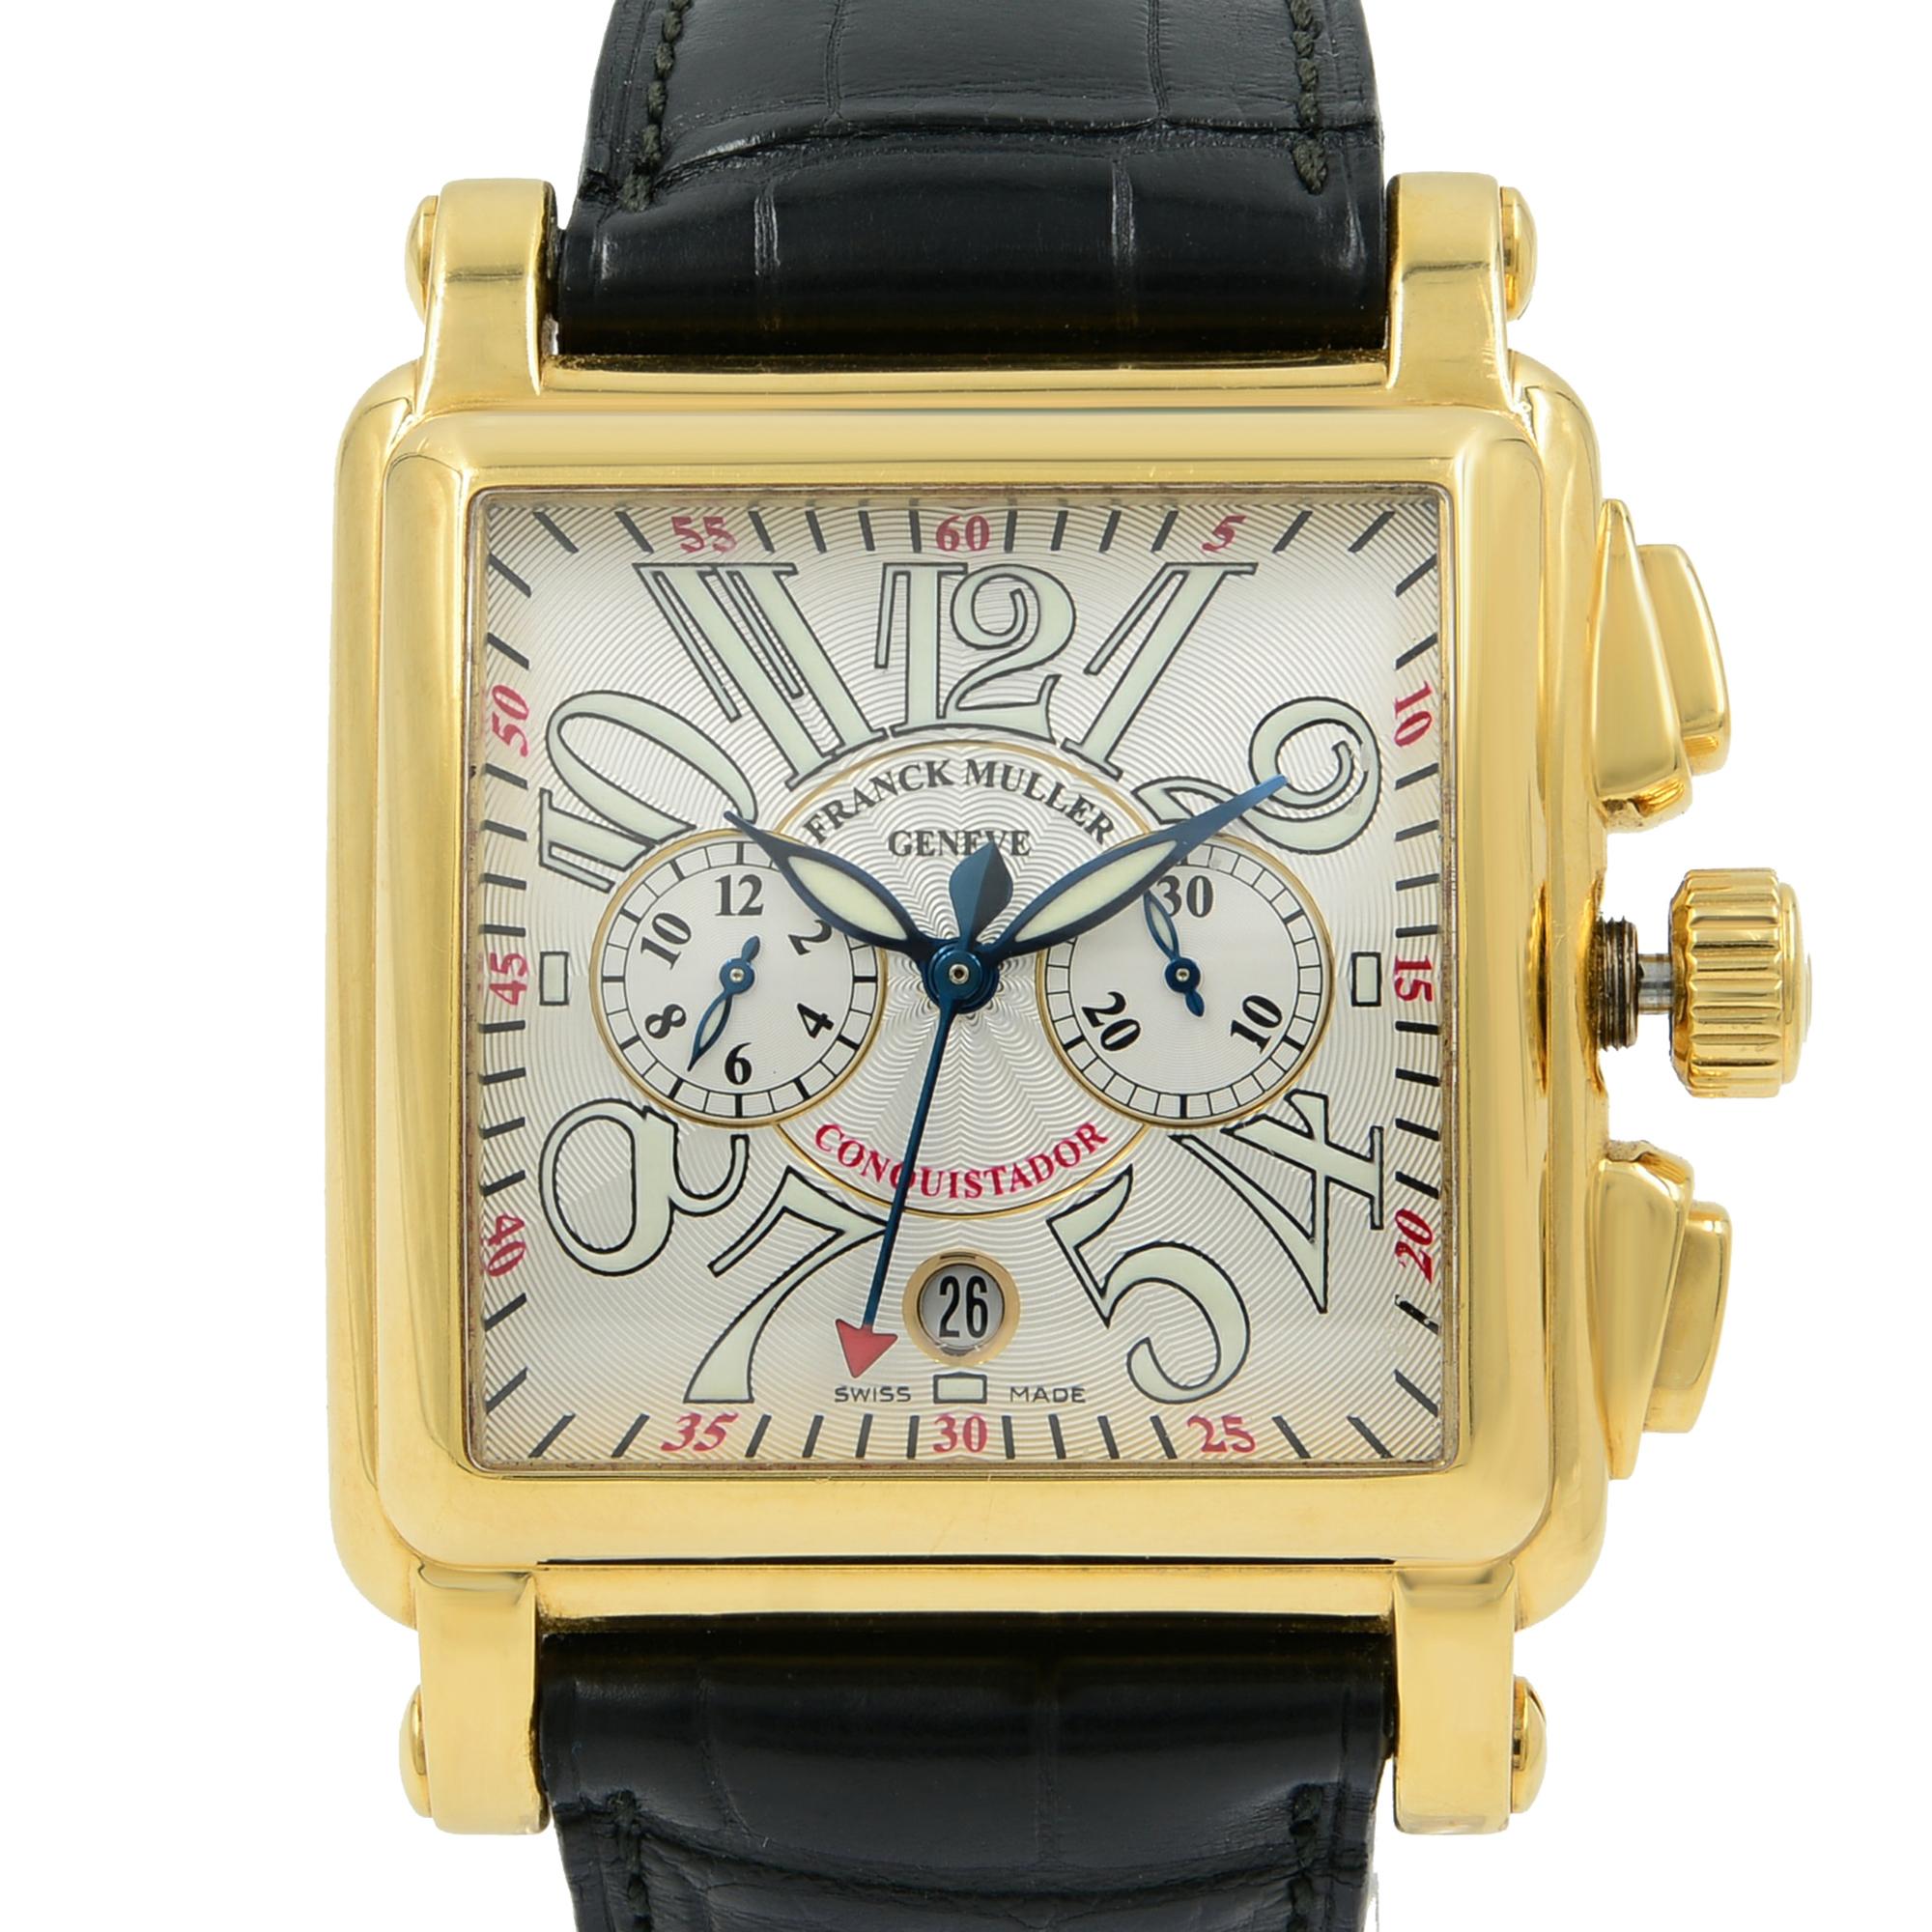 This pre-owned Franck Muller Conquistador  10000 CC is a beautiful men's timepiece that is powered by mechanical (automatic) movement which is cased in a yellow gold case. It has a square shape face, chronograph, date indicator dial and has hand